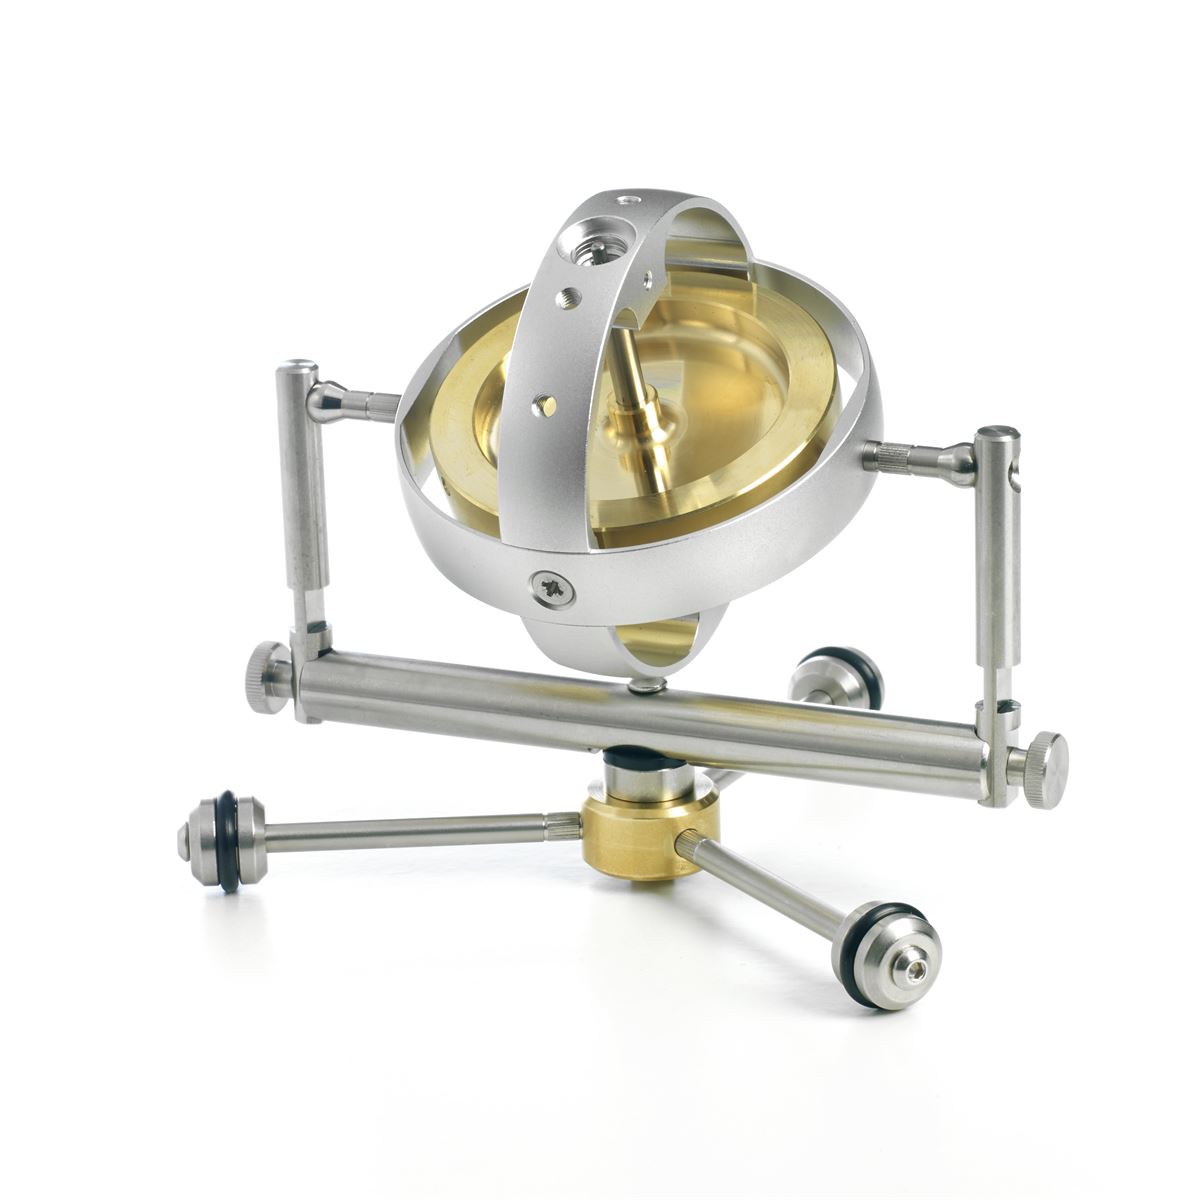 Gimbals add-on kit for super gyroscope